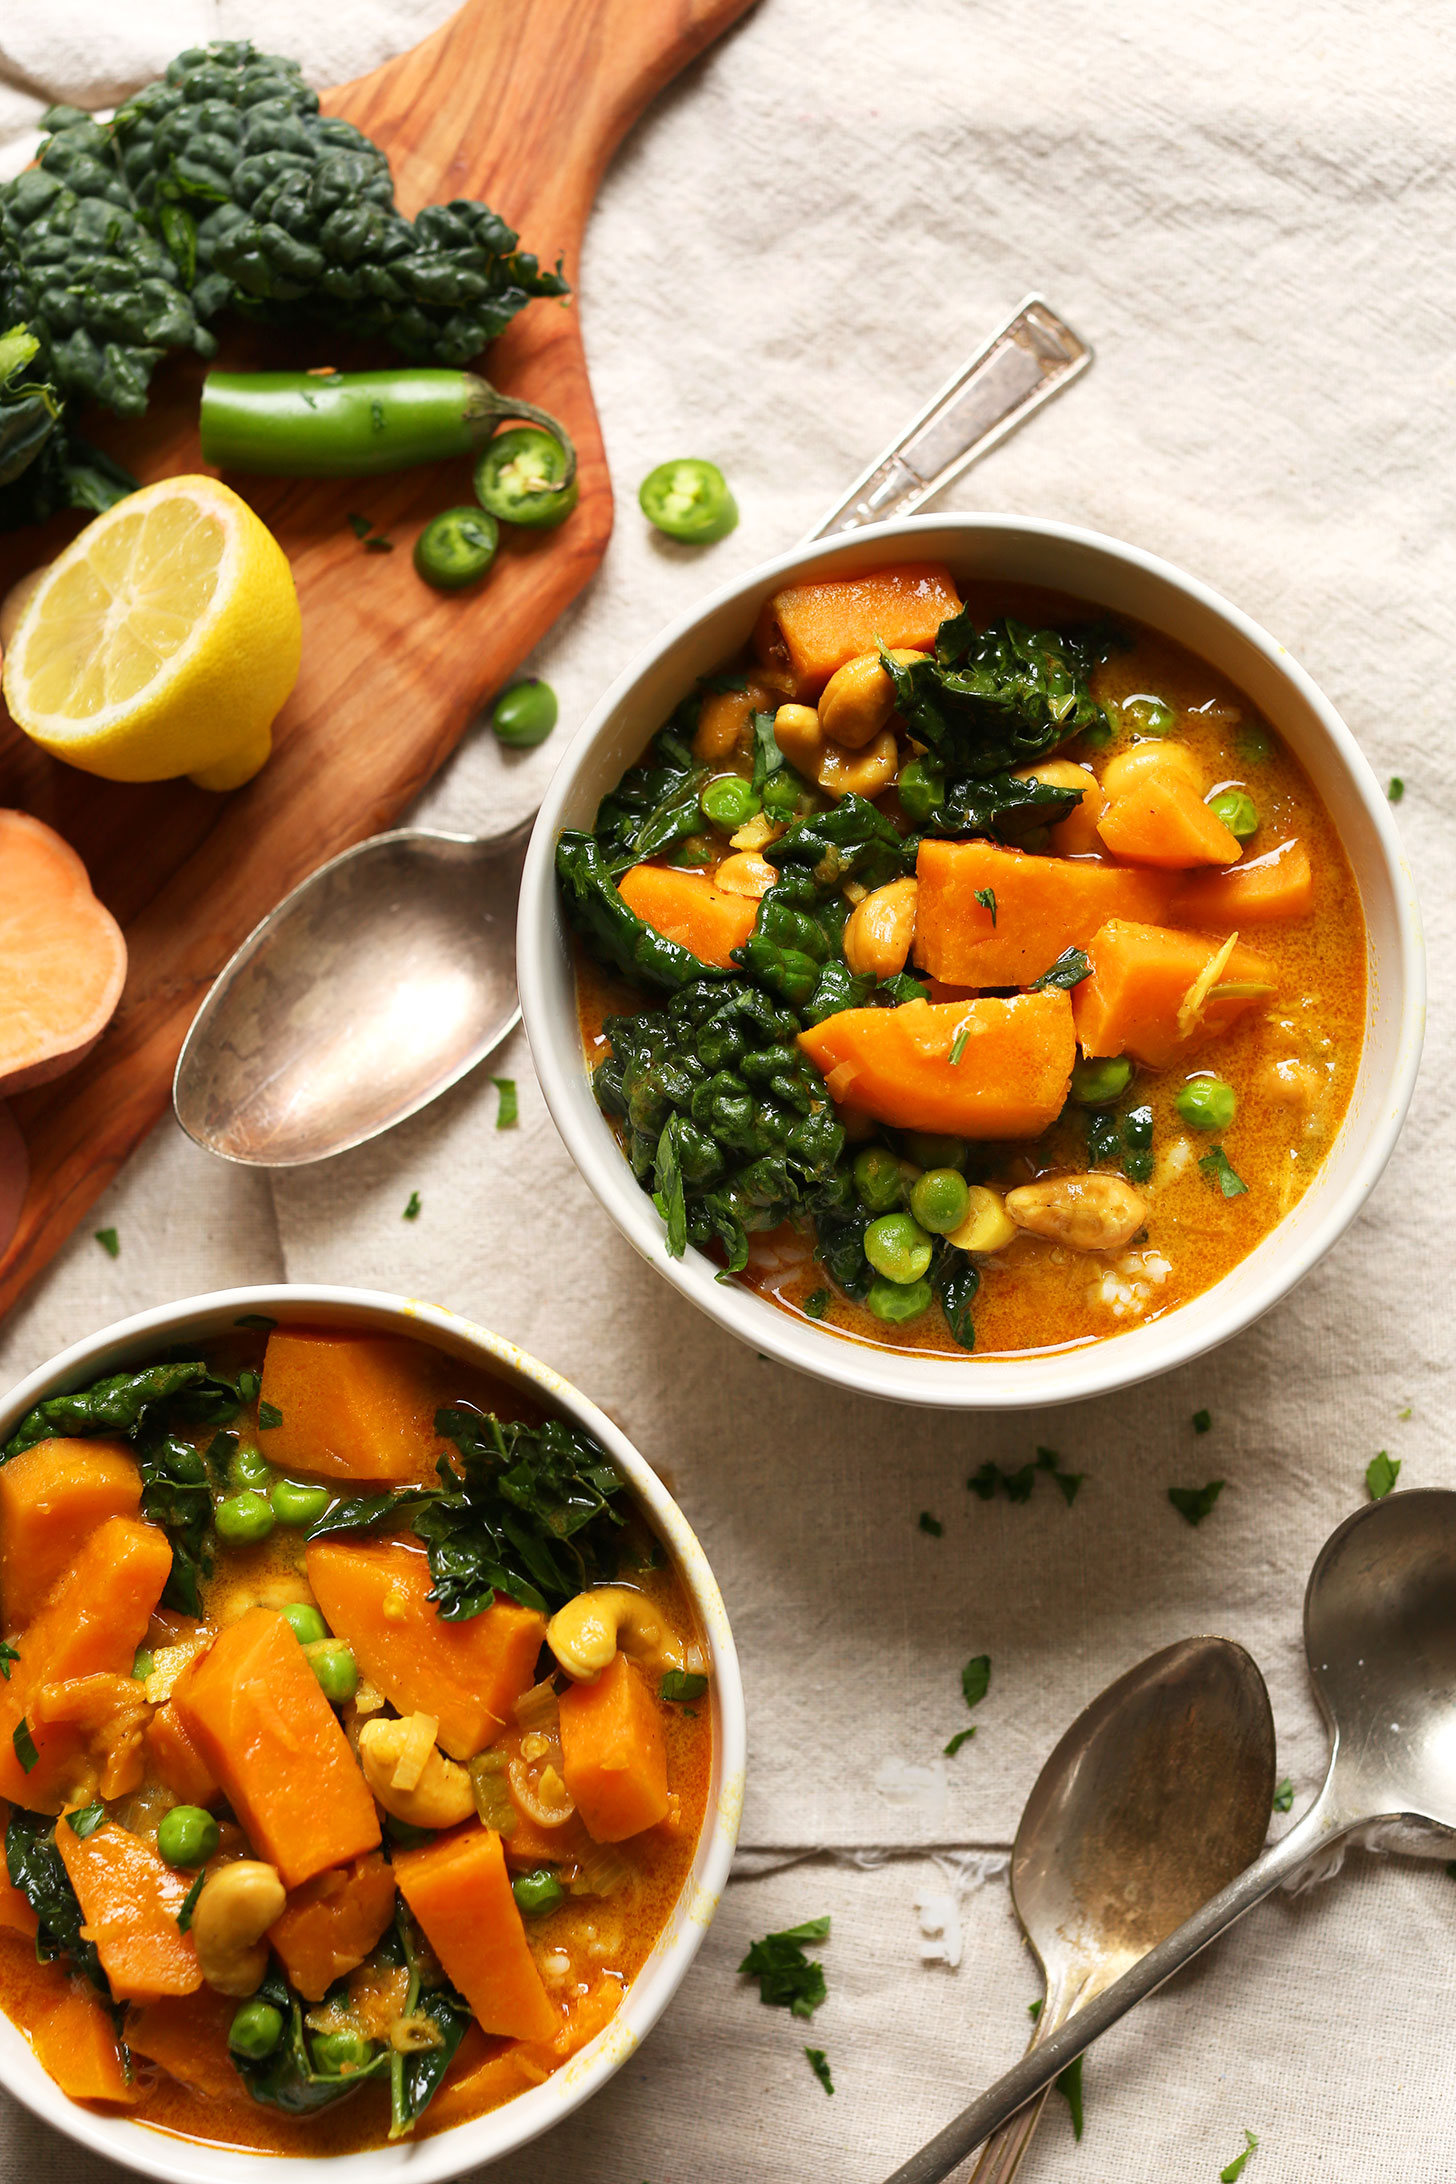 Bowls of our Sweet Potato Kale Curry for an easy protein-rich vegan meal